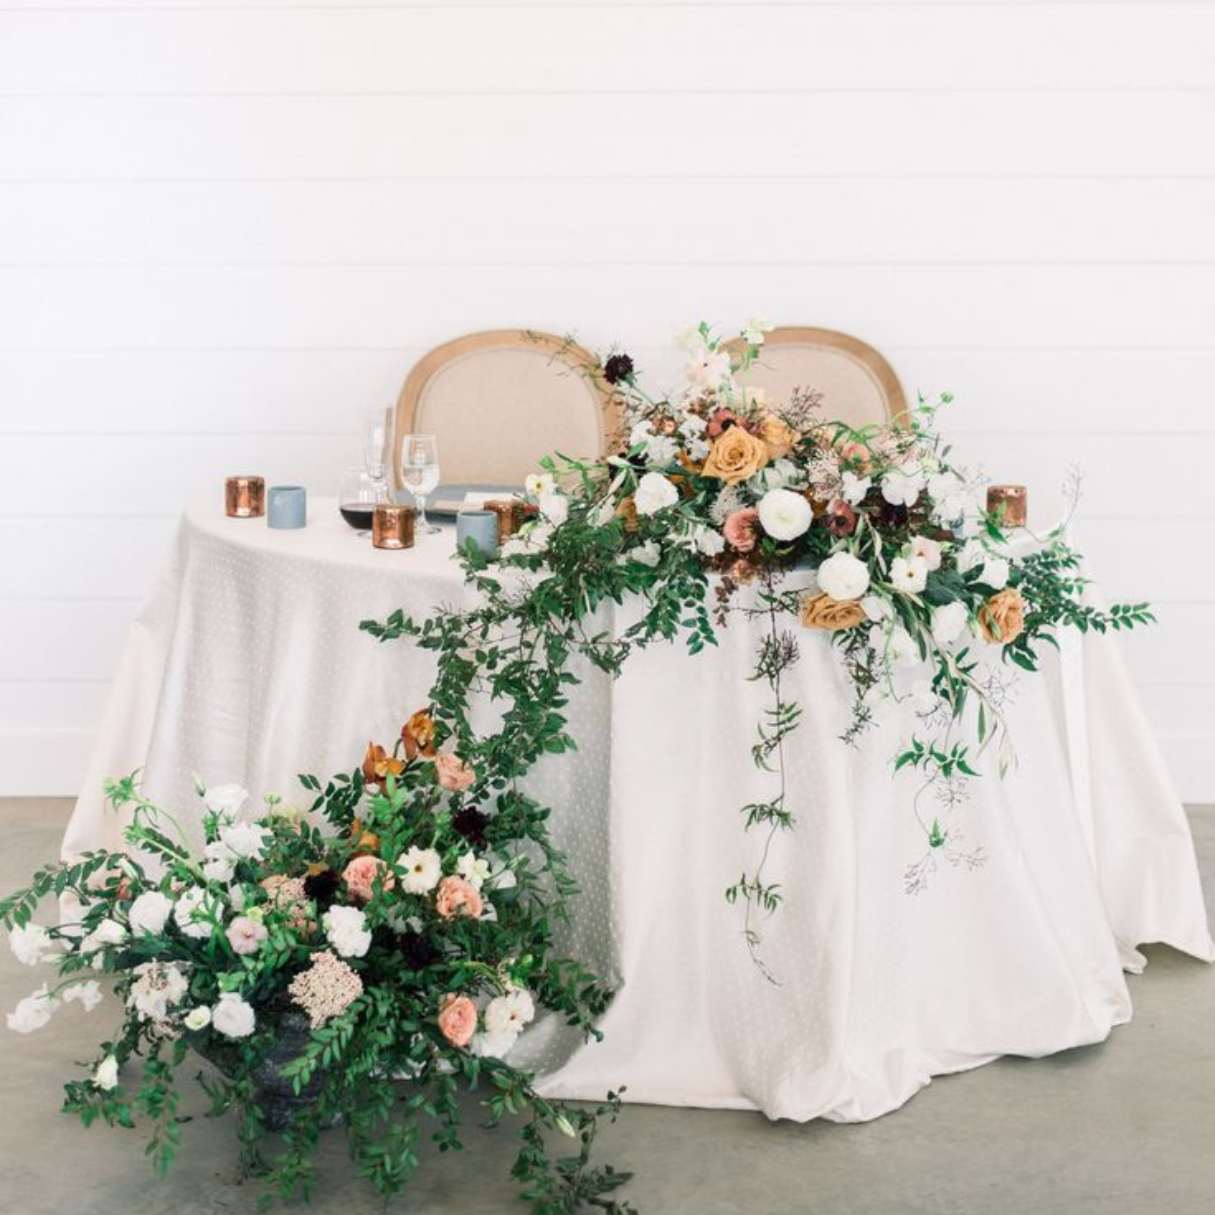 How To Decorate A Greenery Wedding Sweetheart Arch With Tulips